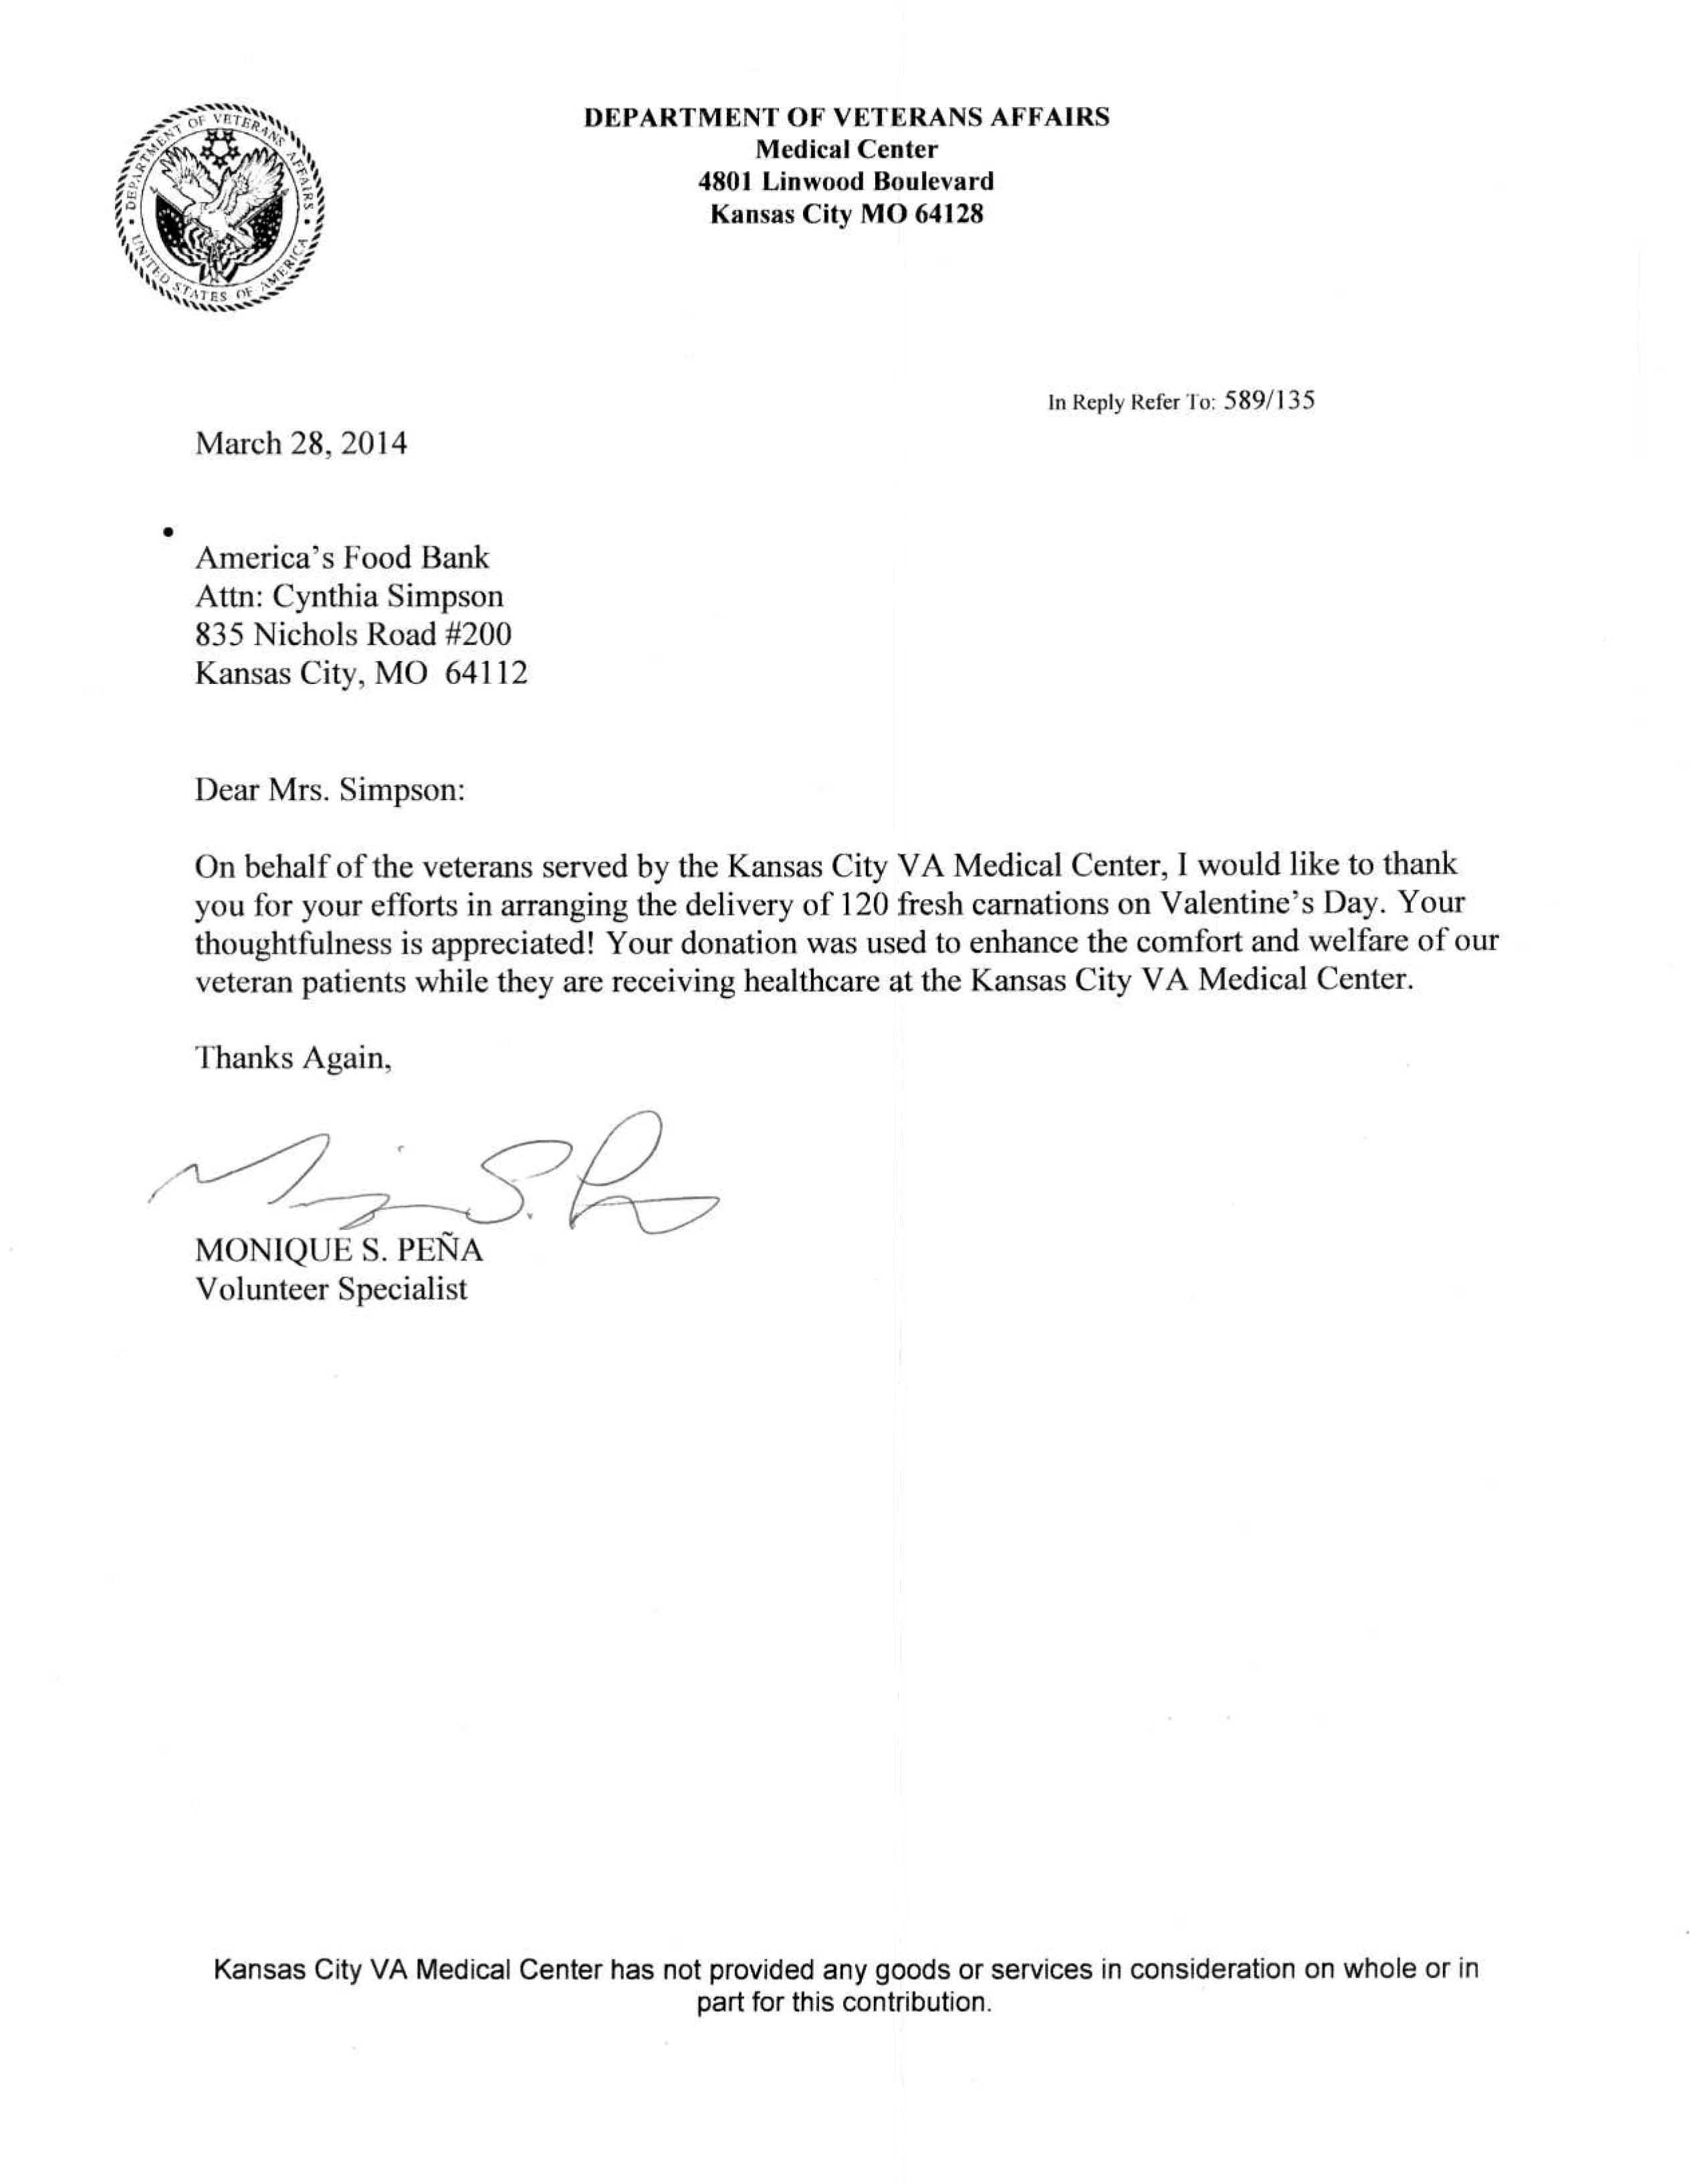 Letter of commendation from The Department of Veteran Affairs